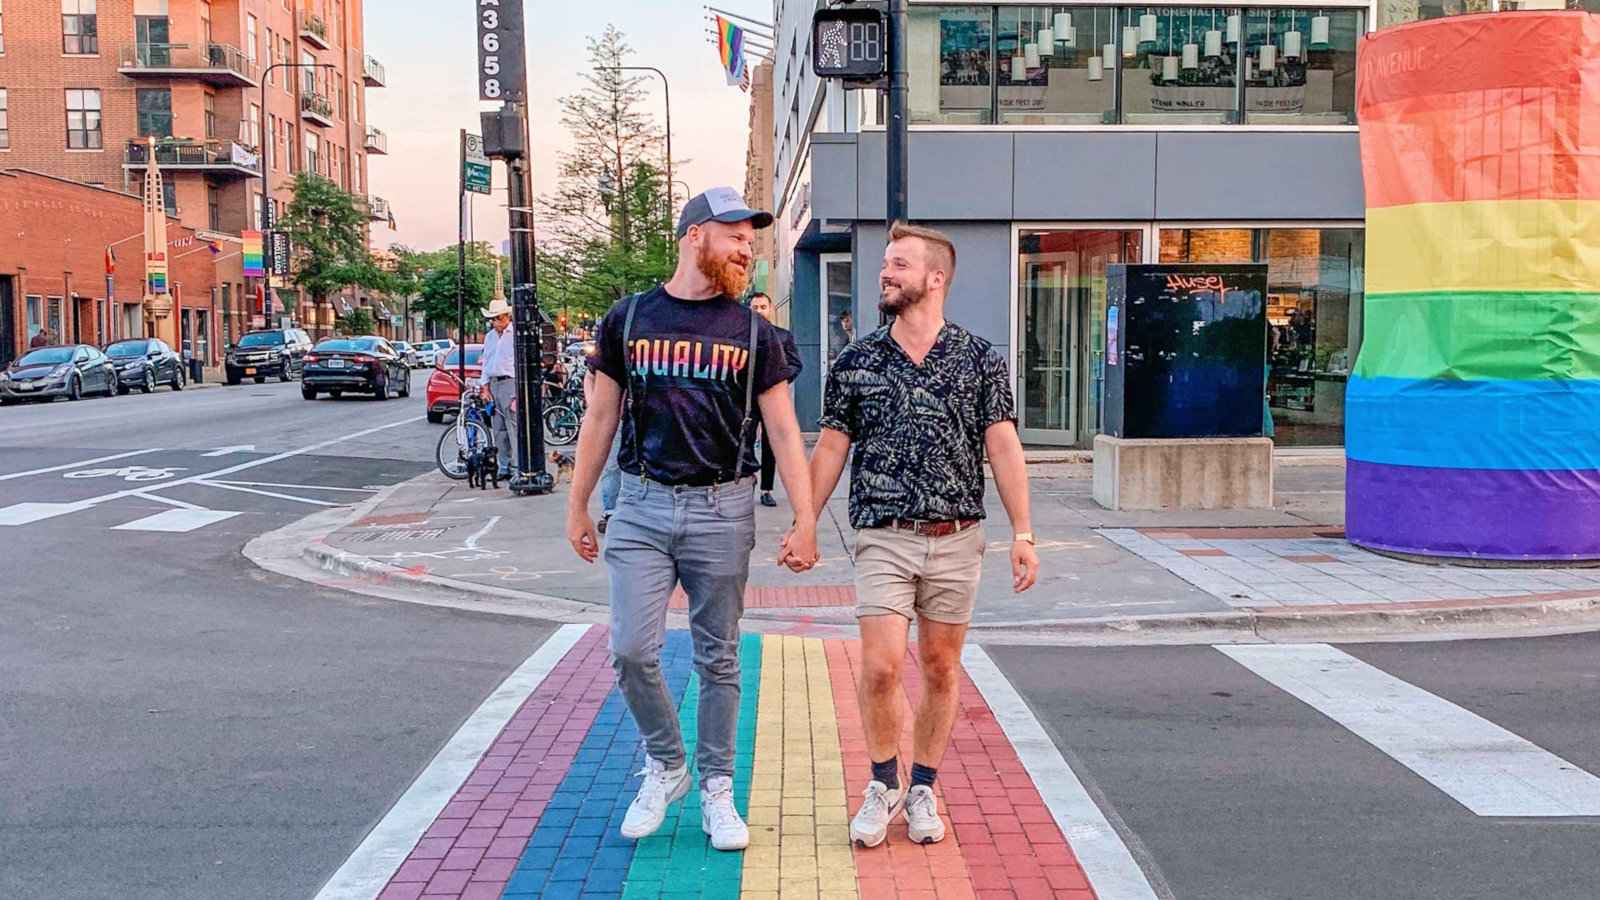 Karl and Daan are the gay couple behind the travel blog Couple of Men and we can't get enough of their content